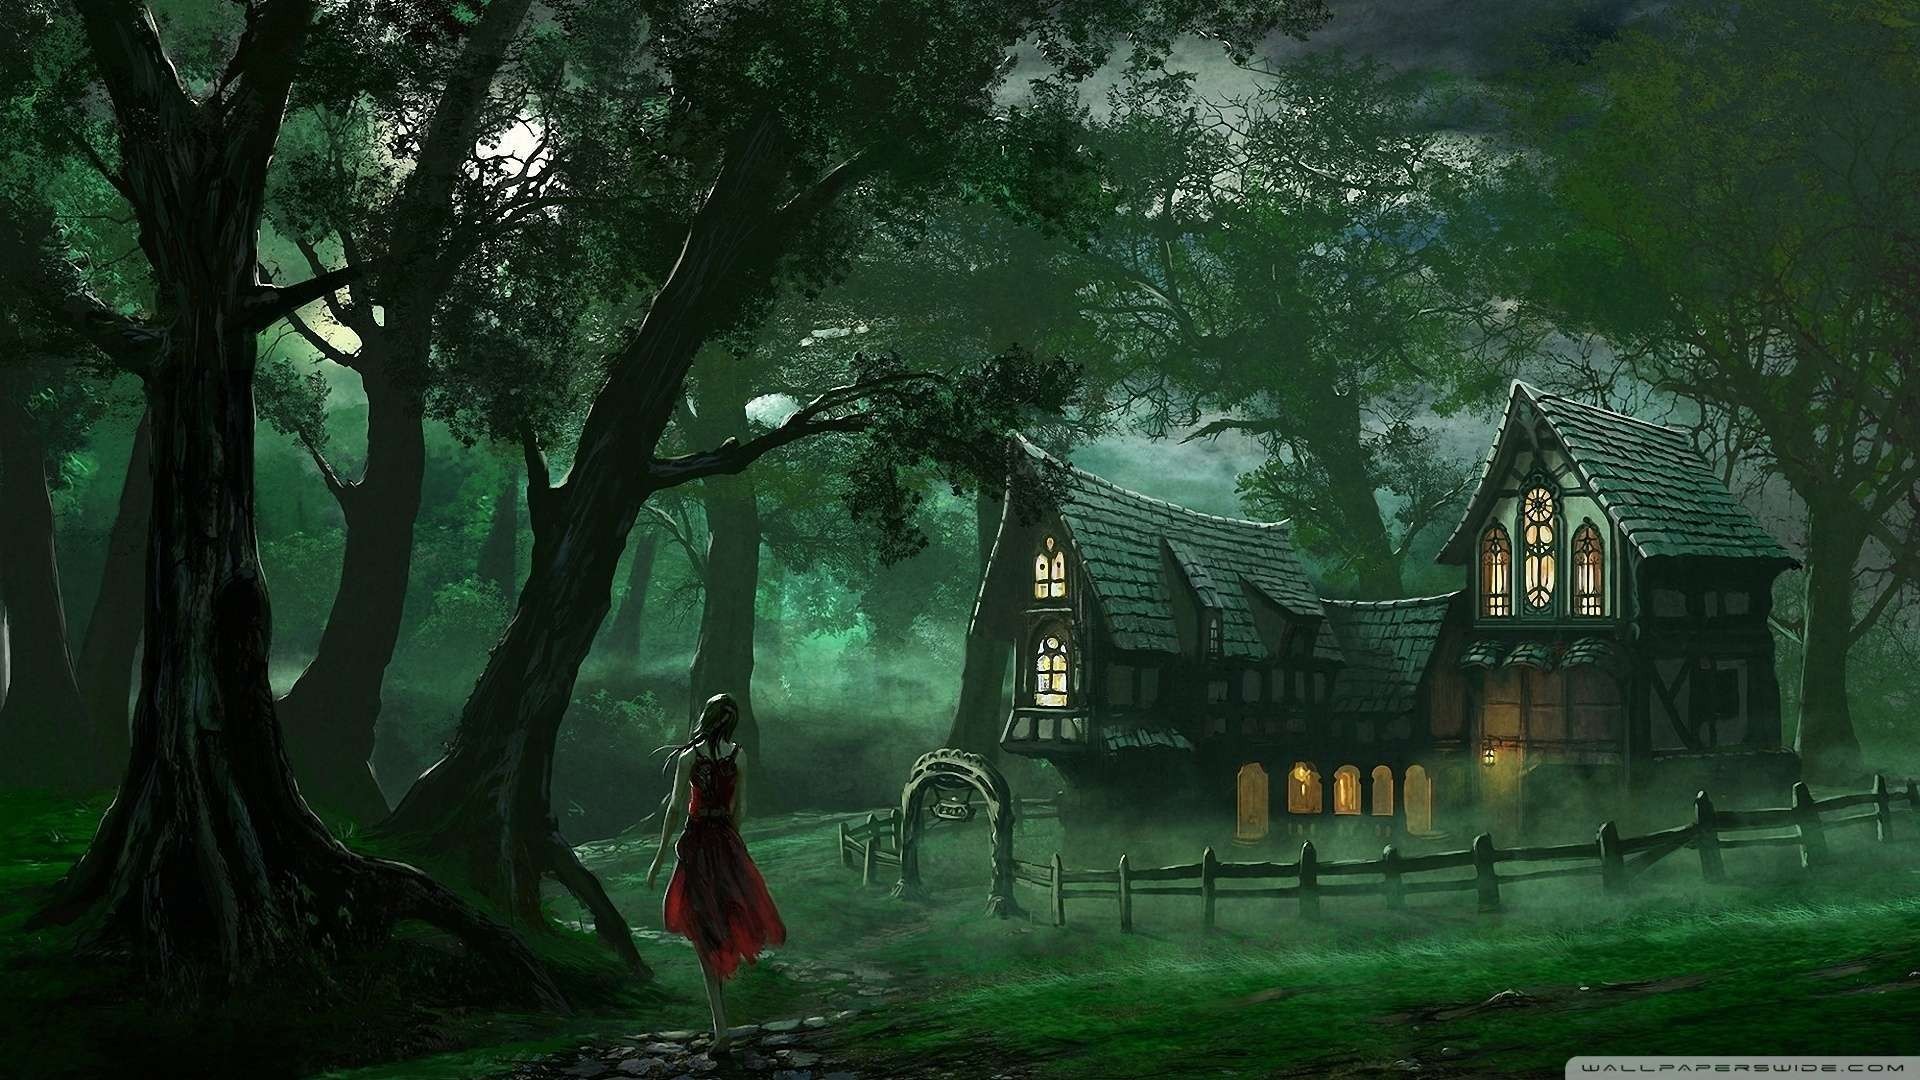 1920x1080  Wallpaper: The Forest House Wallpaper 1080p HD. Upload at  December 31 .